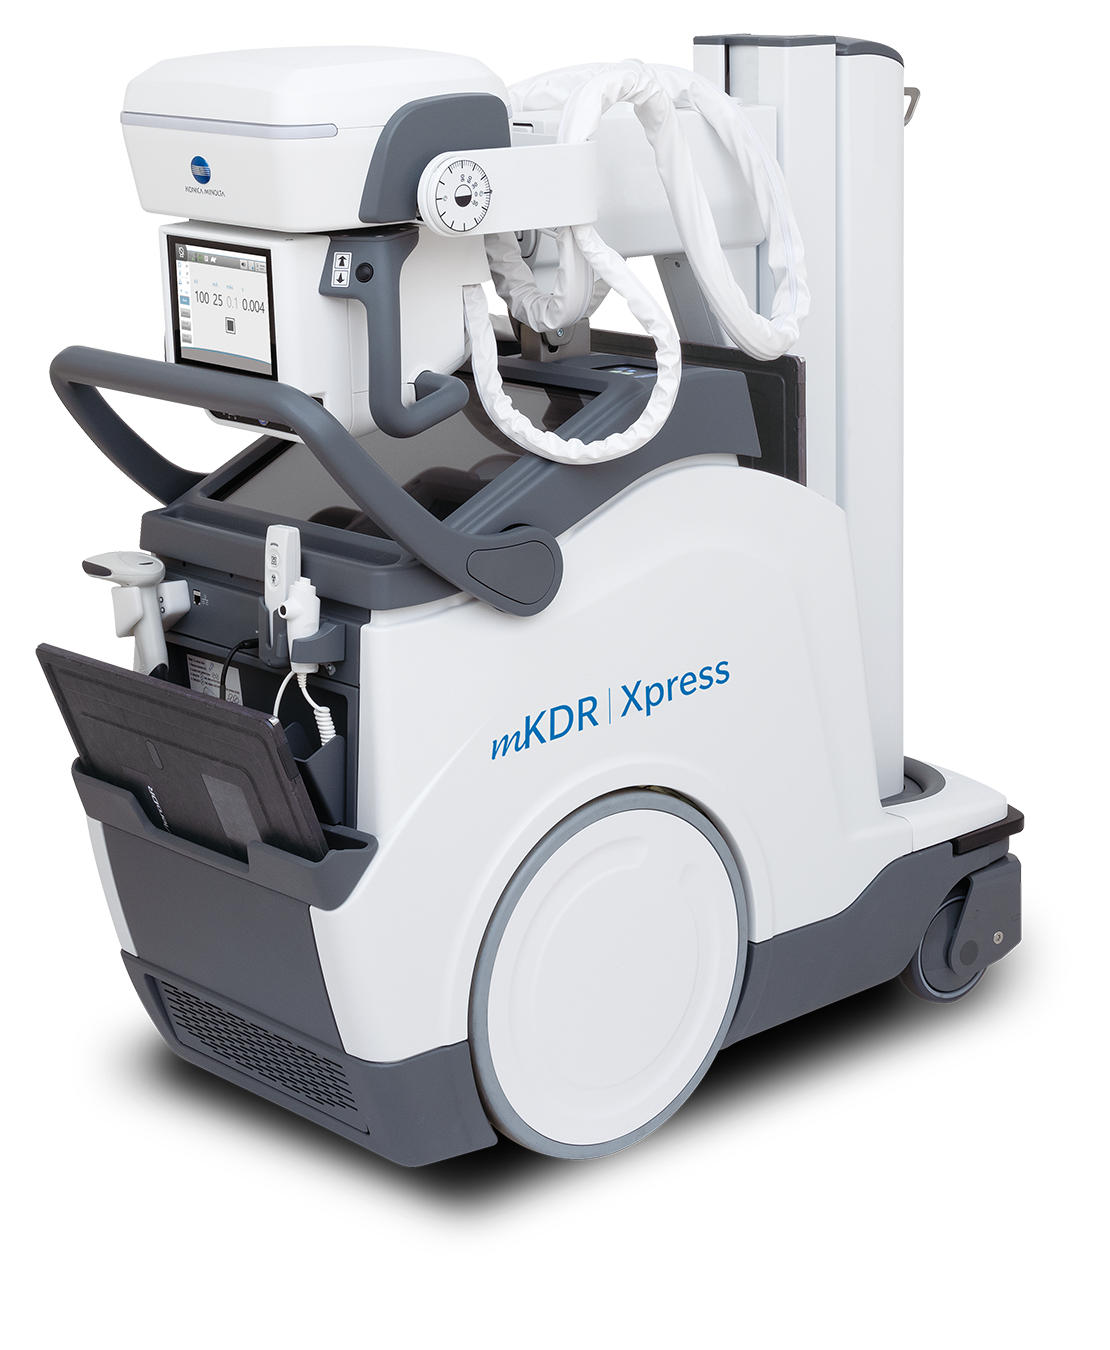 The mKDR Xpress Mobile X-ray System from Konica Minolta Healthcare.